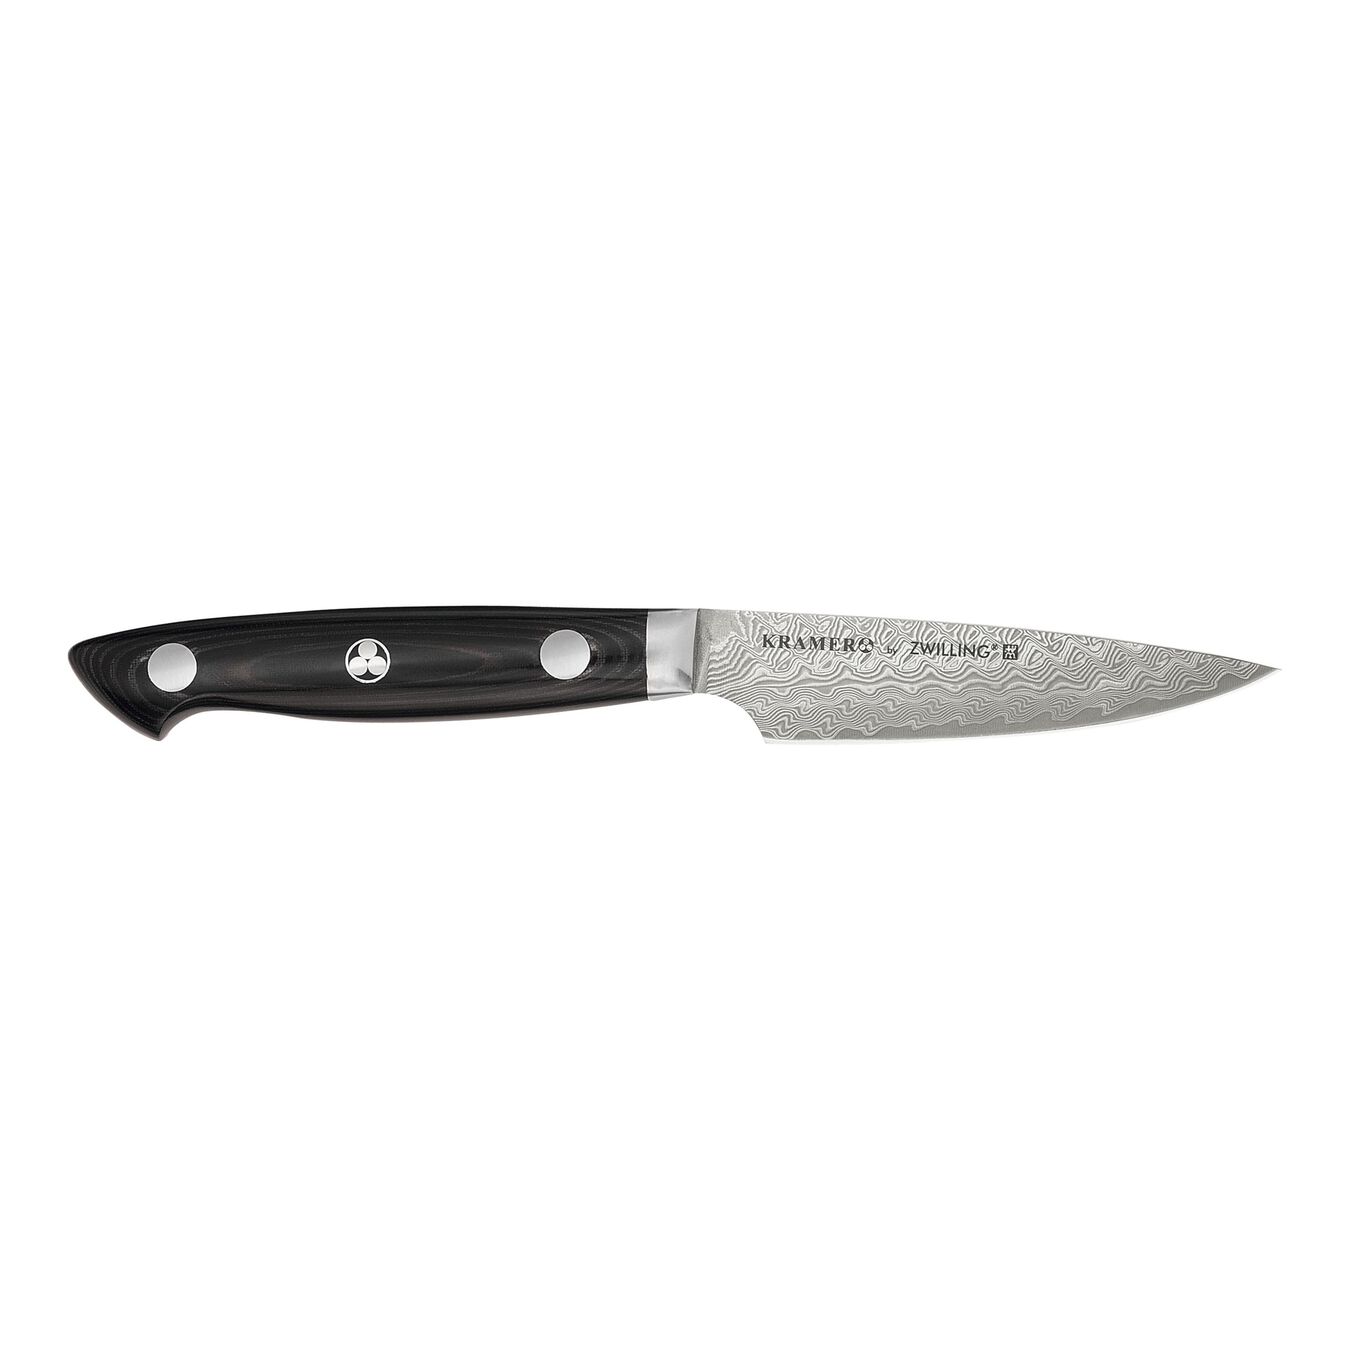 3.5 inch Paring knife - Visual Imperfections,,large 1